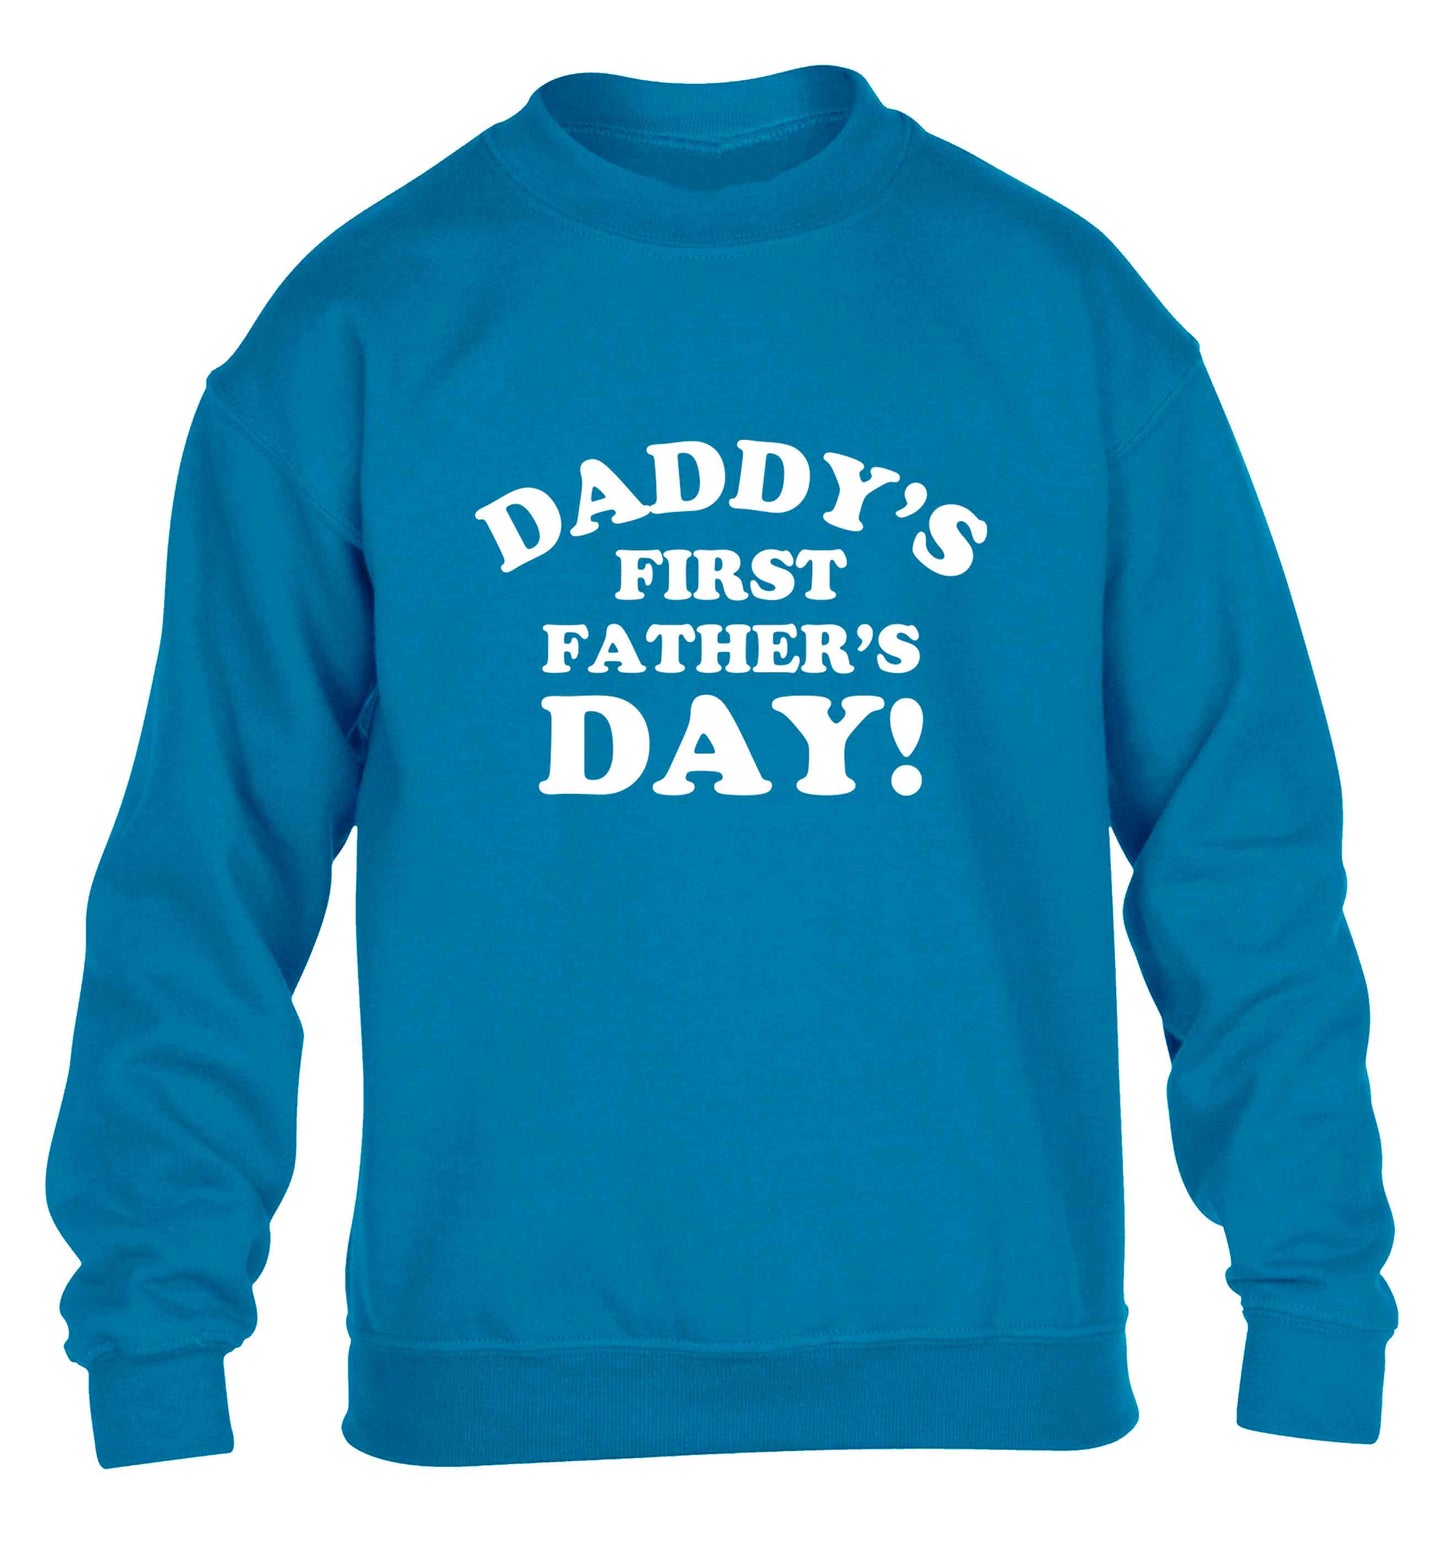 Daddy's first father's day children's blue sweater 12-13 Years